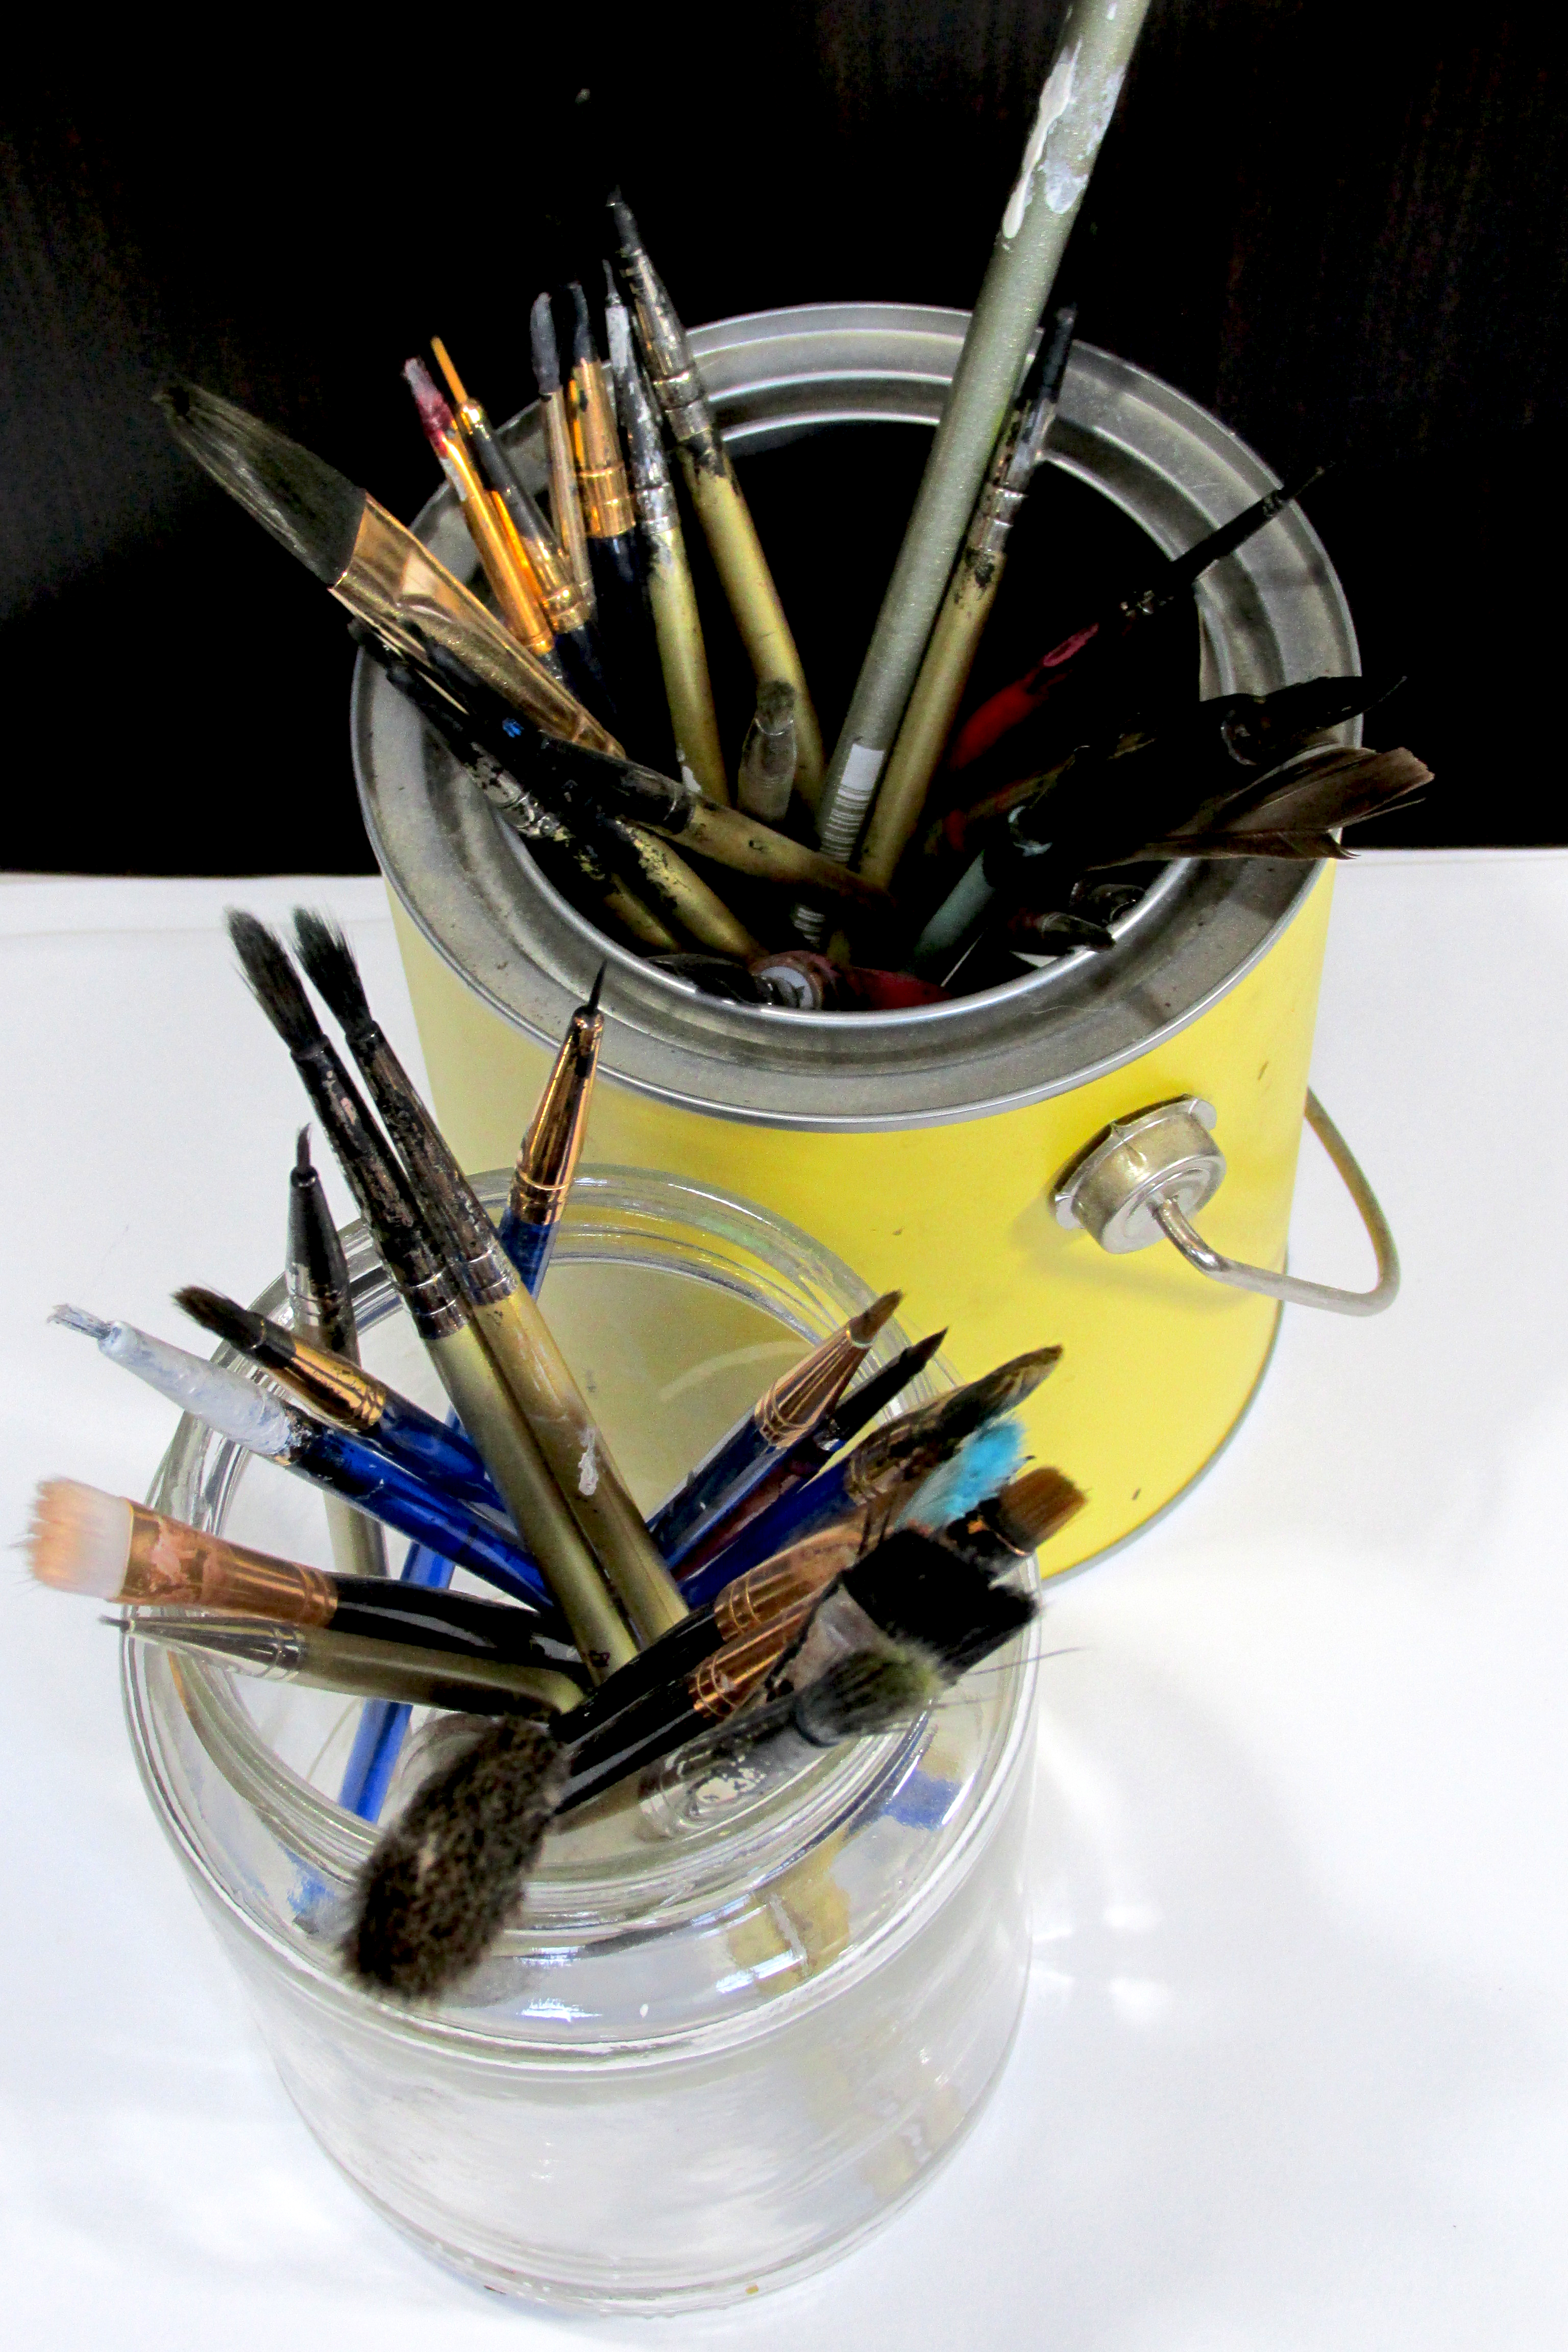 Brushes in a tin yellow bucket